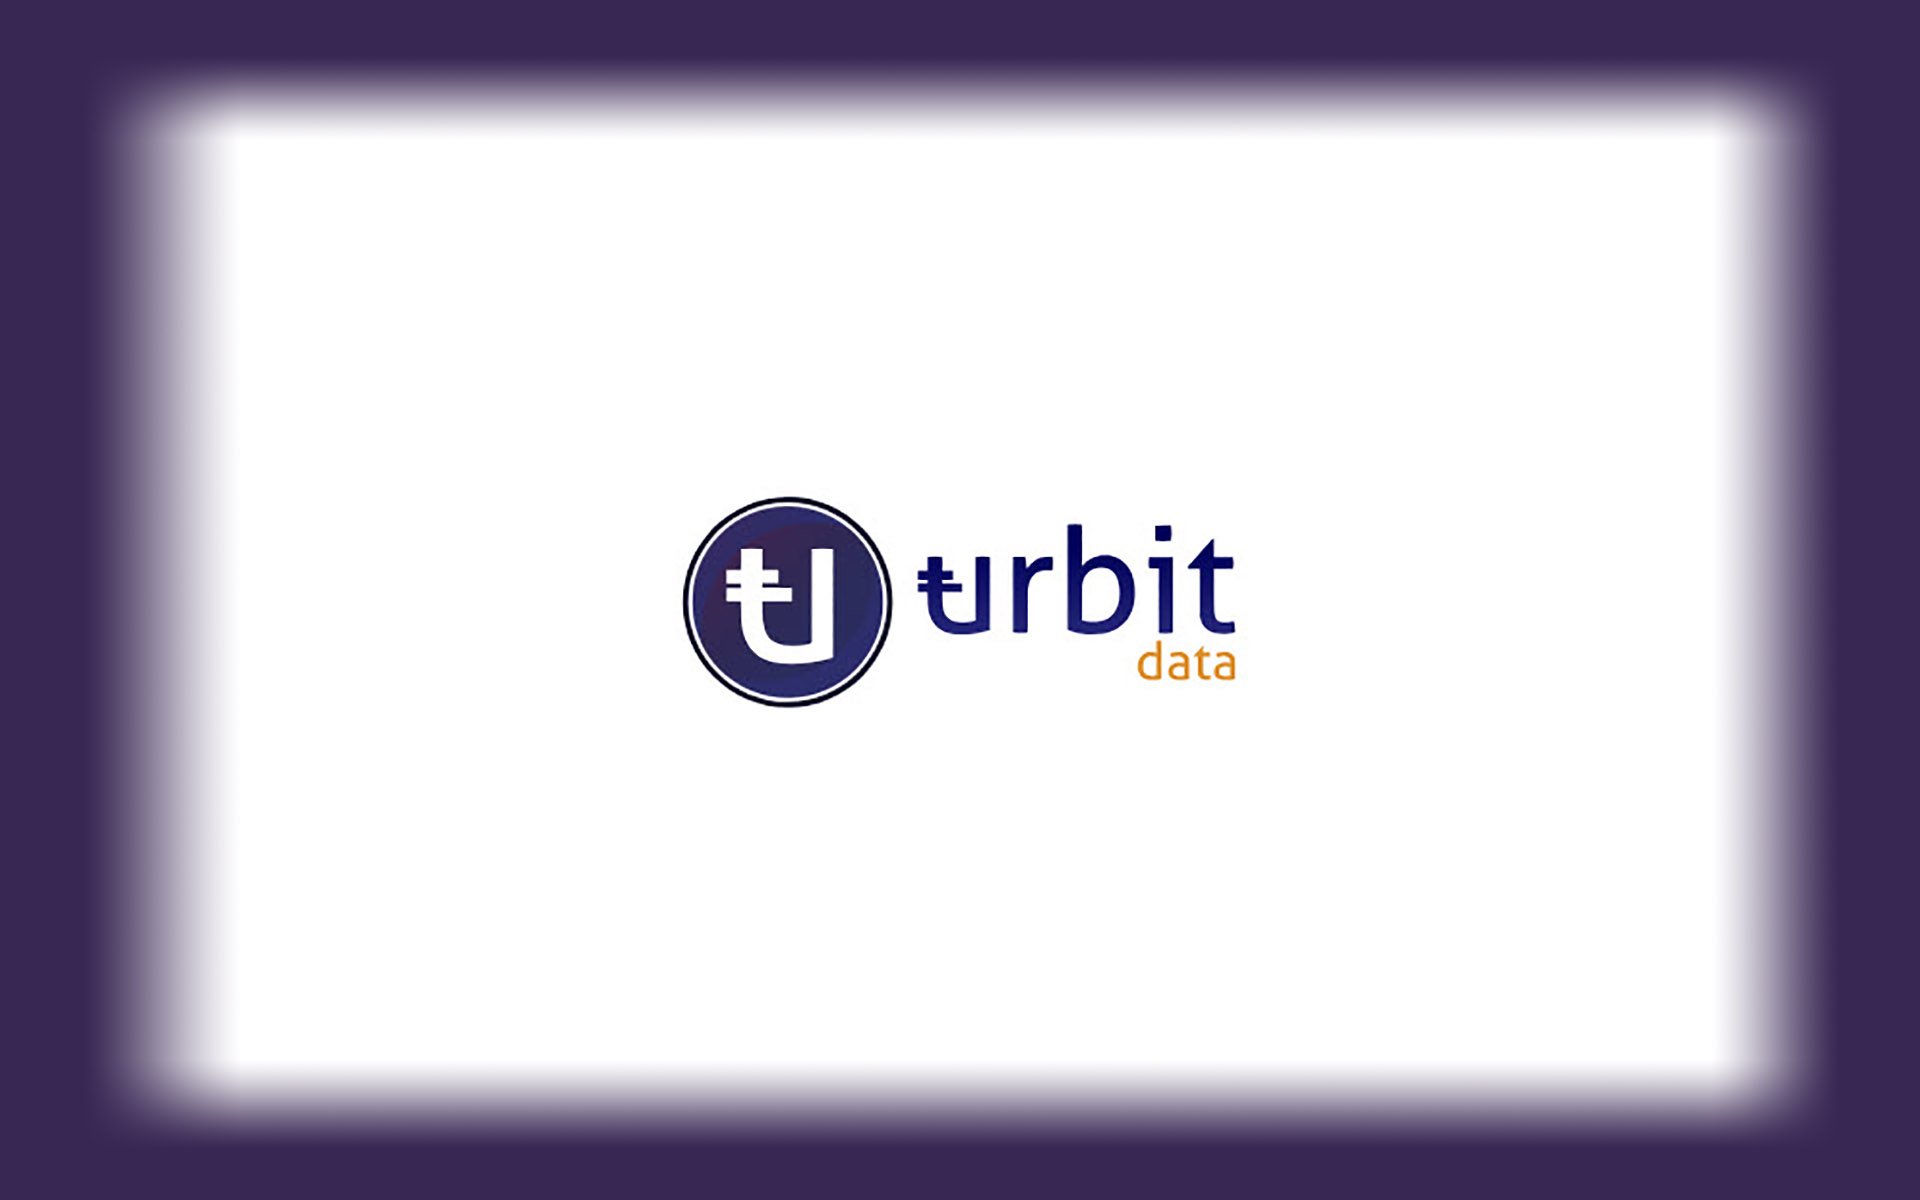 Urbit Data Readies For Impending ICO Pre-Sale – Will Forever Change The Way The Global Real Estate Market Operates – Urbit Data Is Building The Largest Real Estate Online Service Management Platform On The Planet